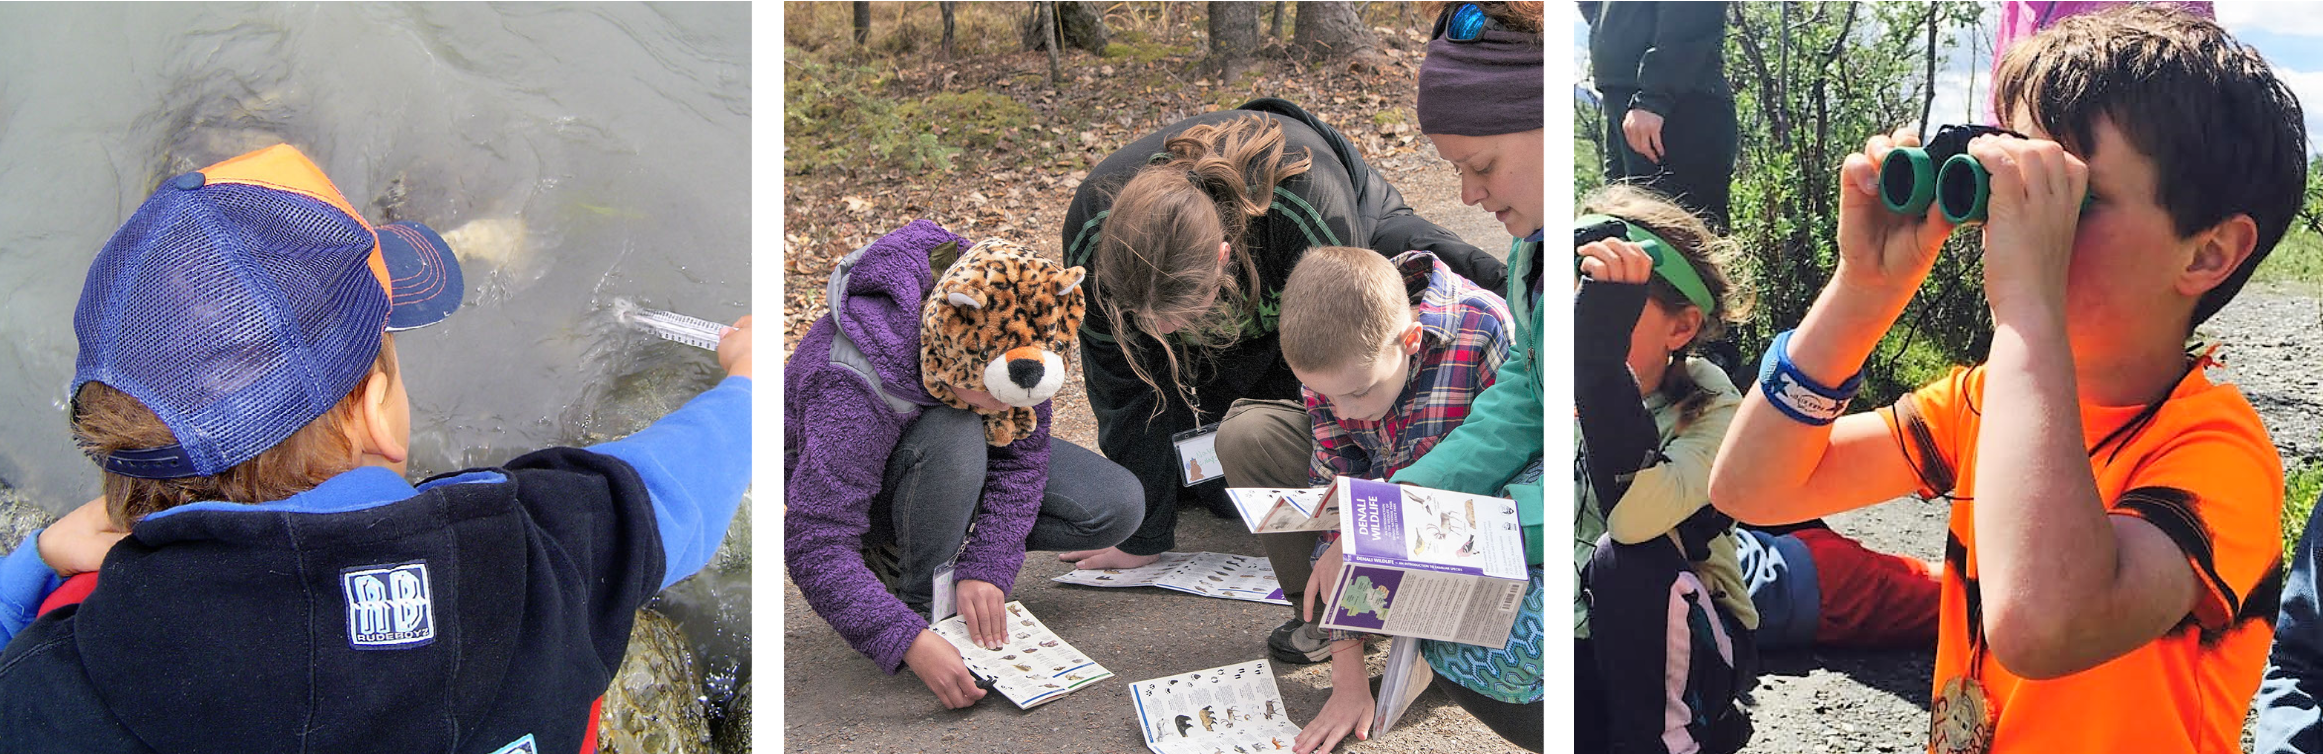 Children explore the park using science tools included in the Denali Discovery Pack